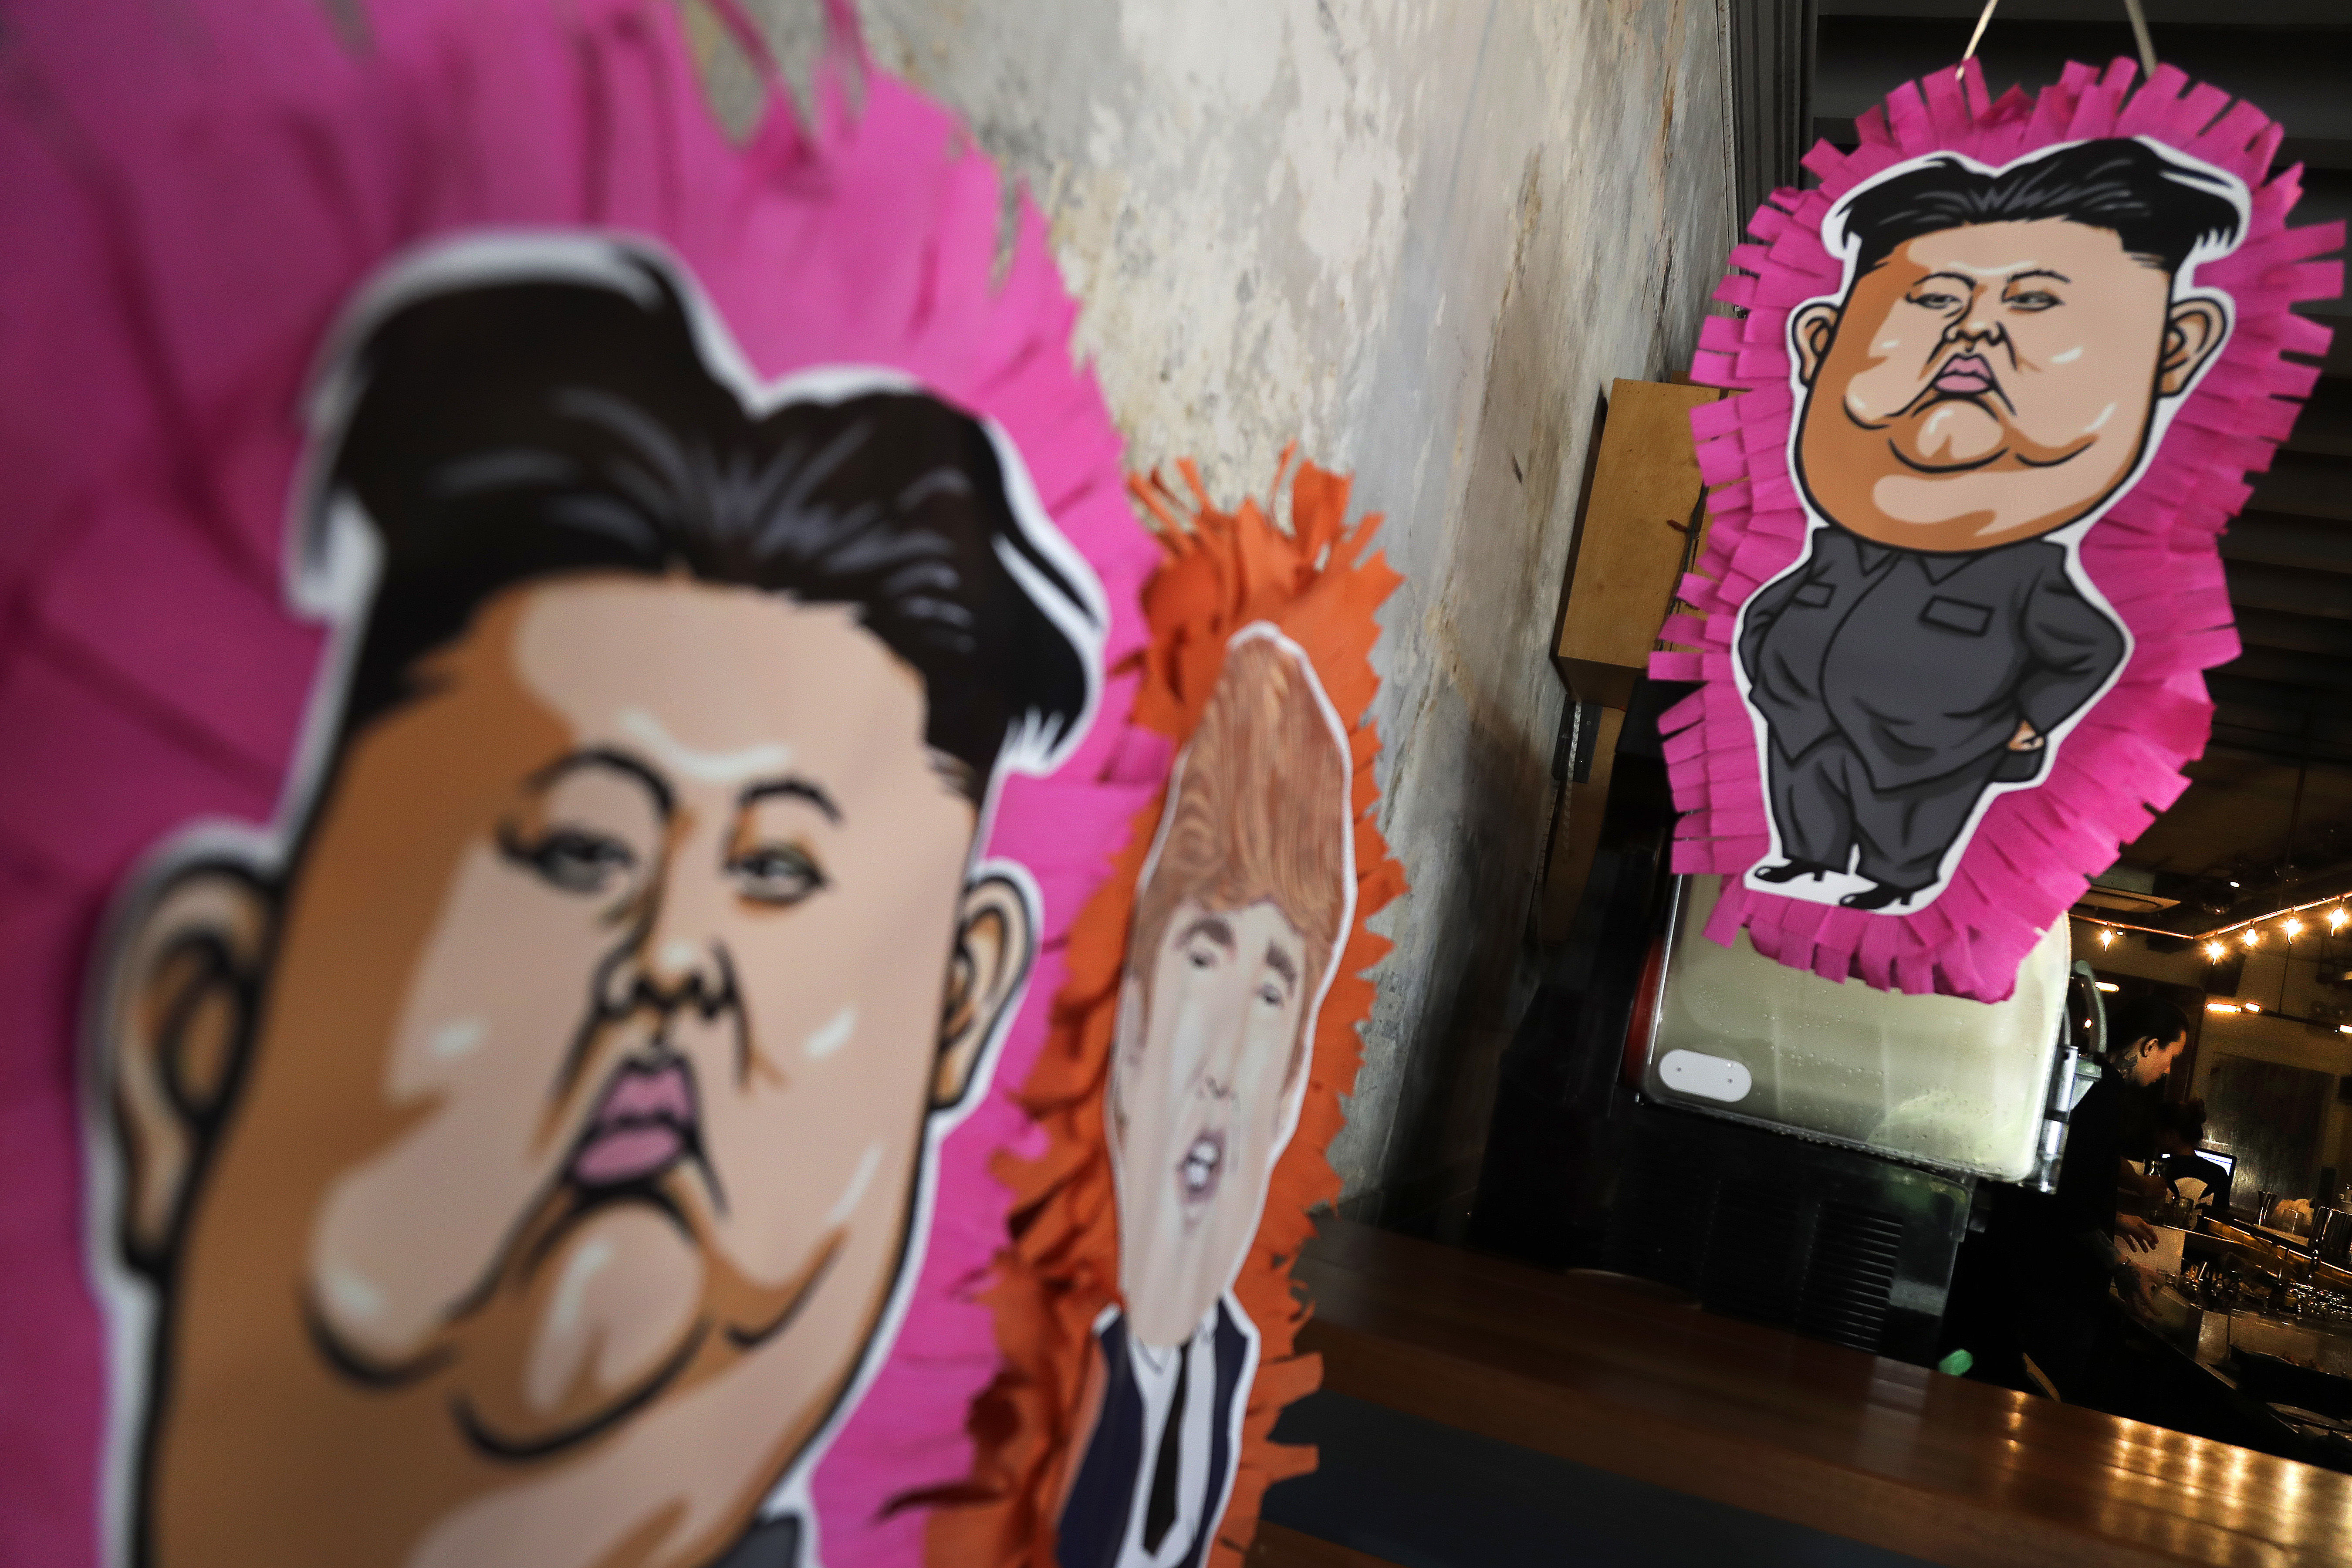 FILE - In this June 7, 2018, file photo, pinatas with the caricatures of U.S. President Donald Trump and North Korean leader Kim Jong Un decorate the Lucha Loco restaurant ahead of the their upcoming summit in Singapore. Singapore is a city that takes great pride in its food, so it’s not surprising that enterprising restaurateurs are using next week’s historic summit between U.S. President Donald Trump and North Korean leader Kim Jong Un to showcase some culinary creativity. Restaurants are marking the city-state’s time in the global spotlight with everything from red, white and blue cocktails to tacos named after the two leaders.(AP Photo/Wong Maye-E, File)